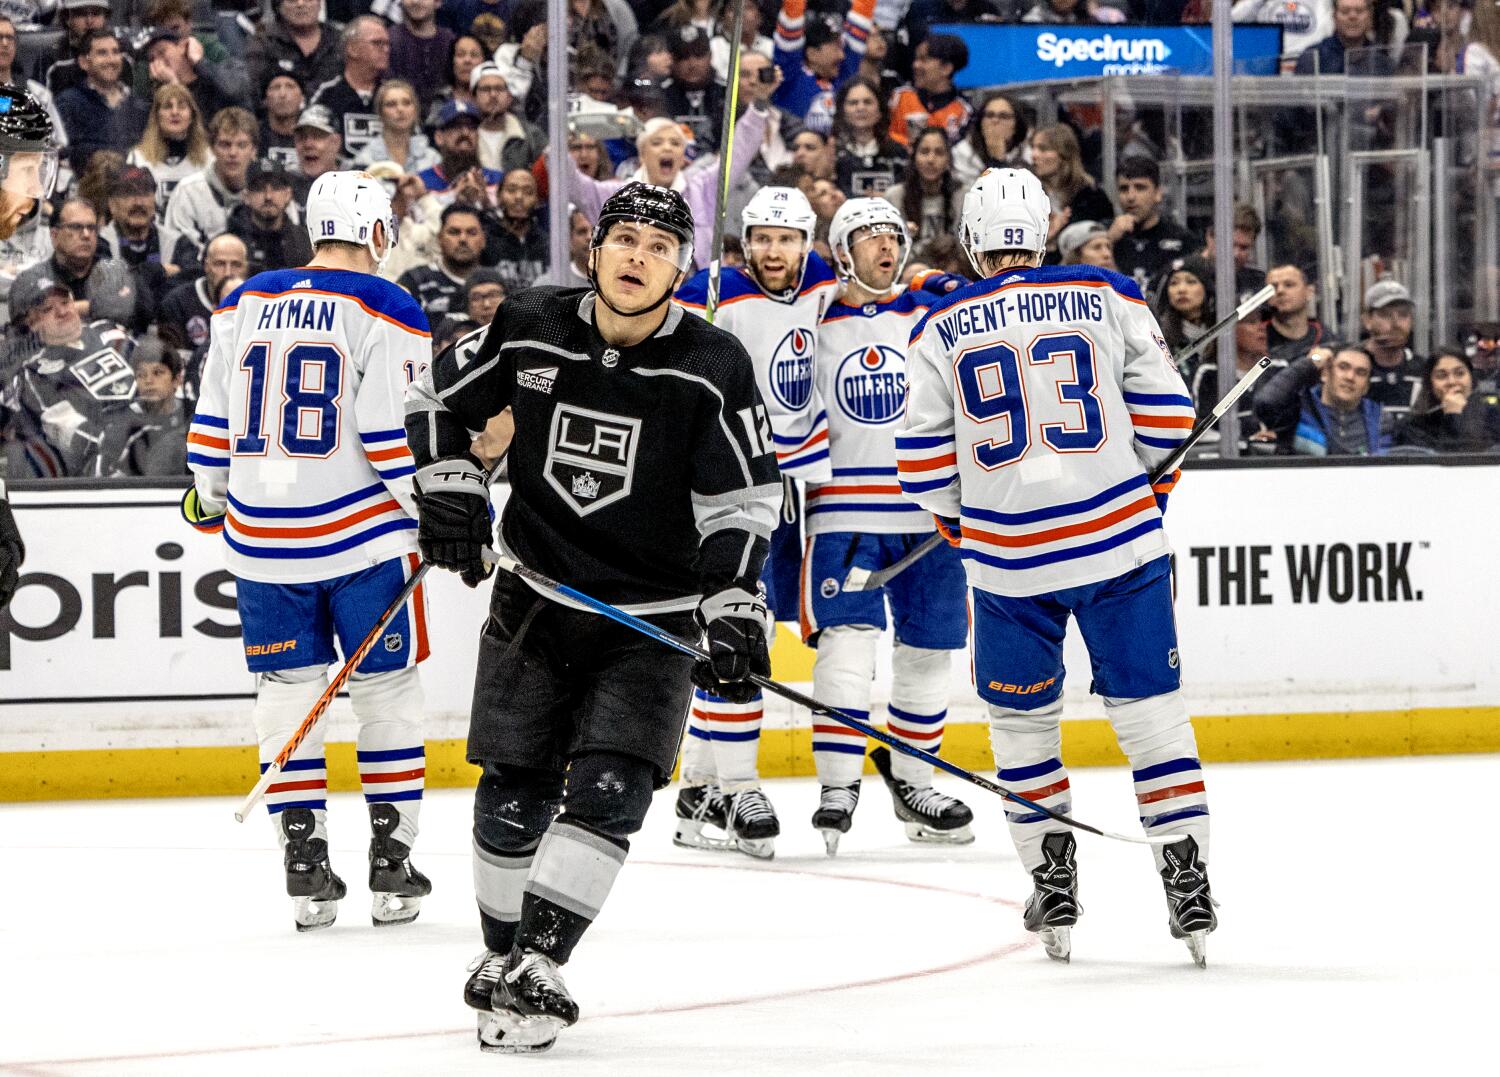 Kings fall to Oilers in a Game 4 shutout, moving to the brink of elimination